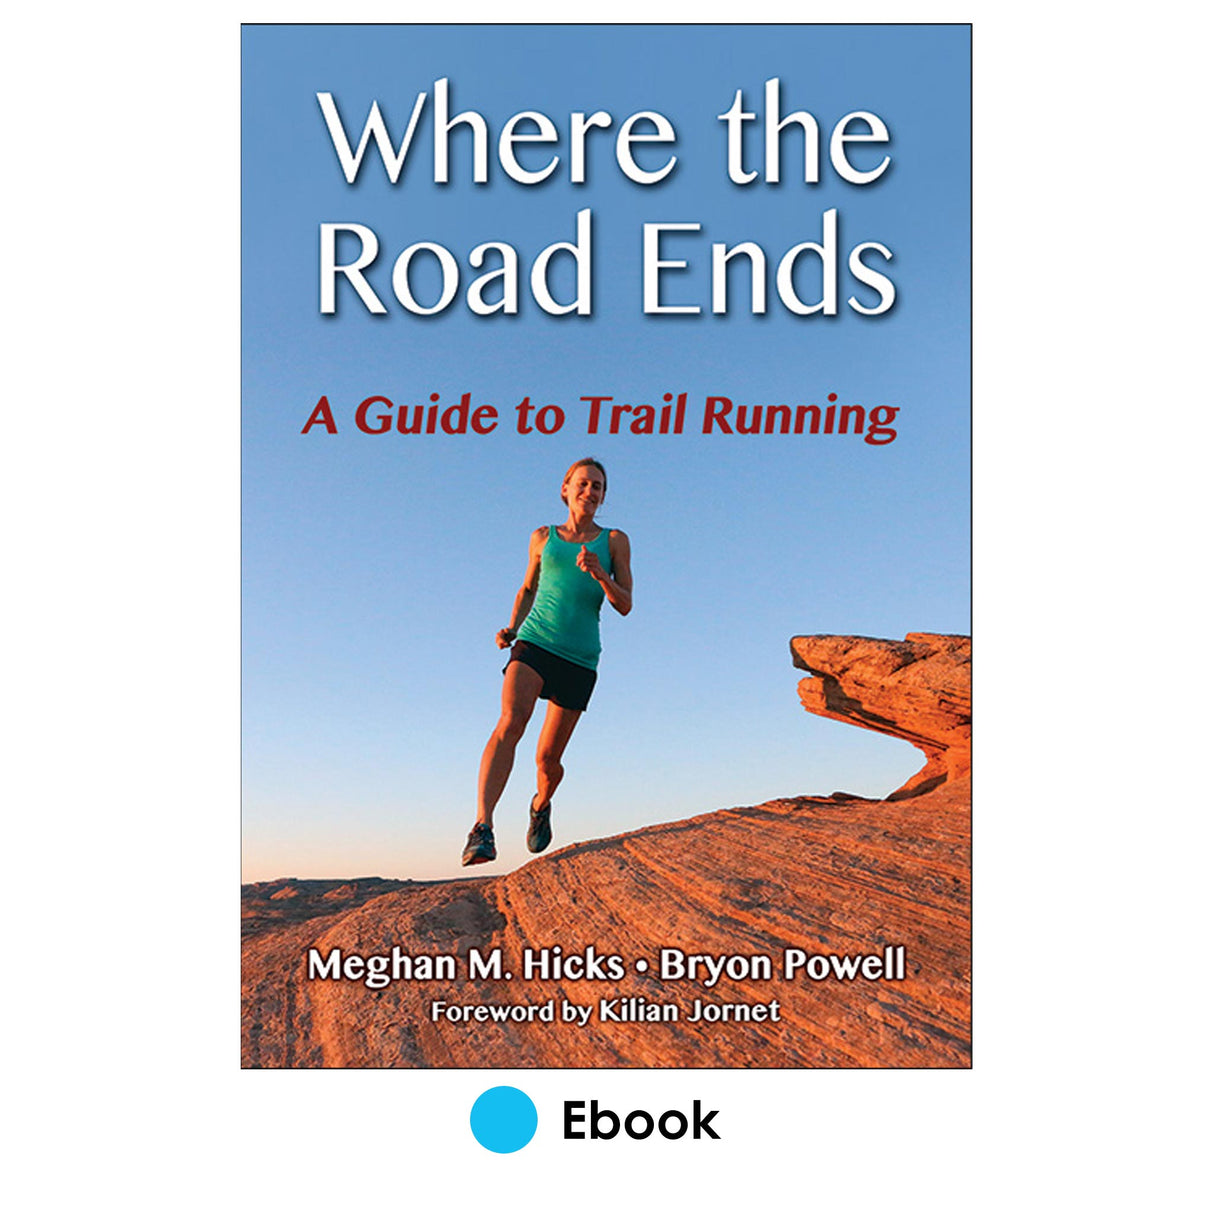 Where the Road Ends PDF